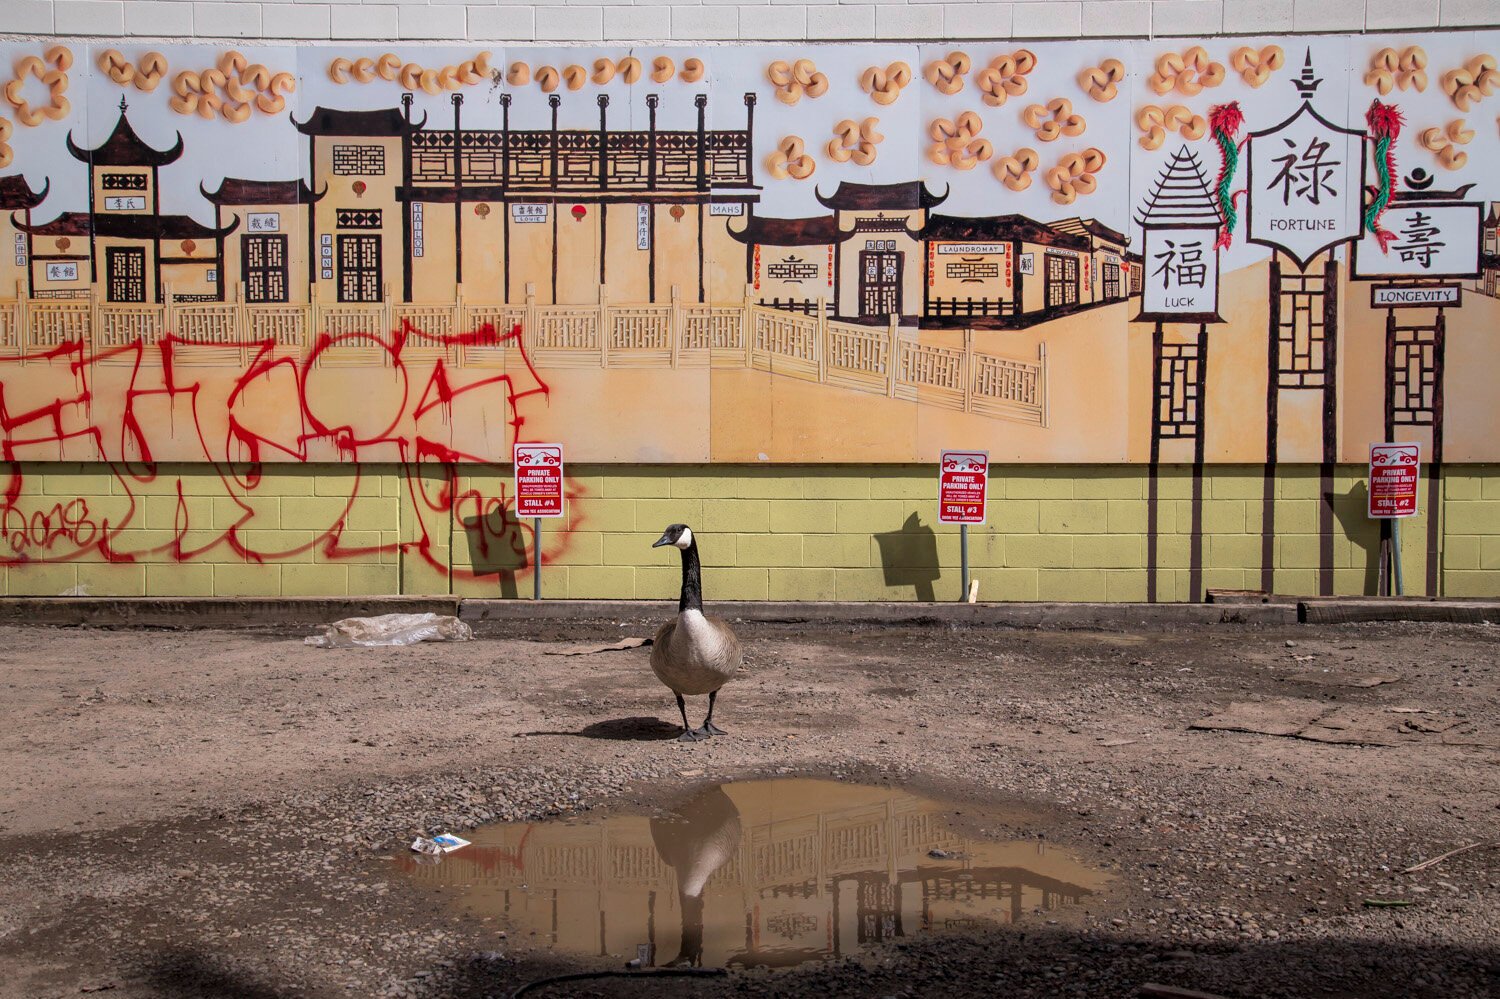  A Canada goose rests in front of a mural in an alleyway in Chinatown. The wall commemorates the family names of early Chinese-Canadians who came to Calgary at the beginning of the 20th century to work hard with a hope of finding a better life. Despi